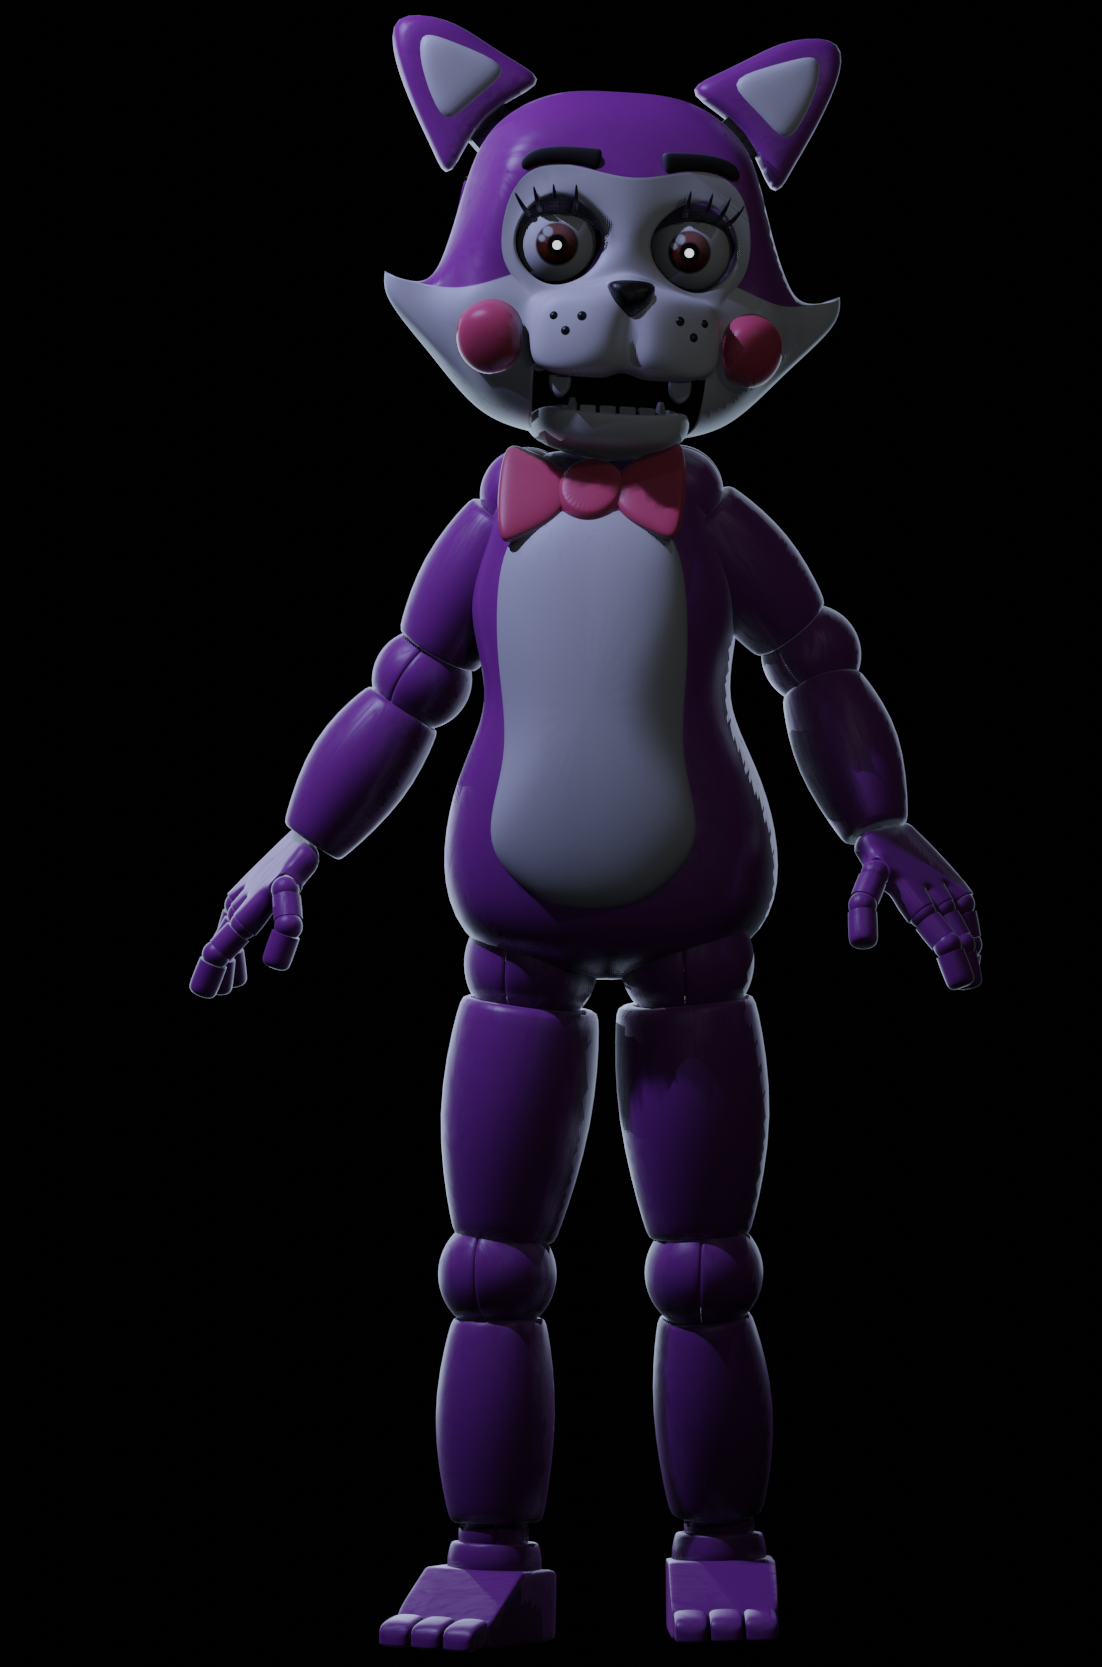 SFM FNAC] Candy's Reation to FNAC 1 Remastered by OPandTSFan on DeviantArt